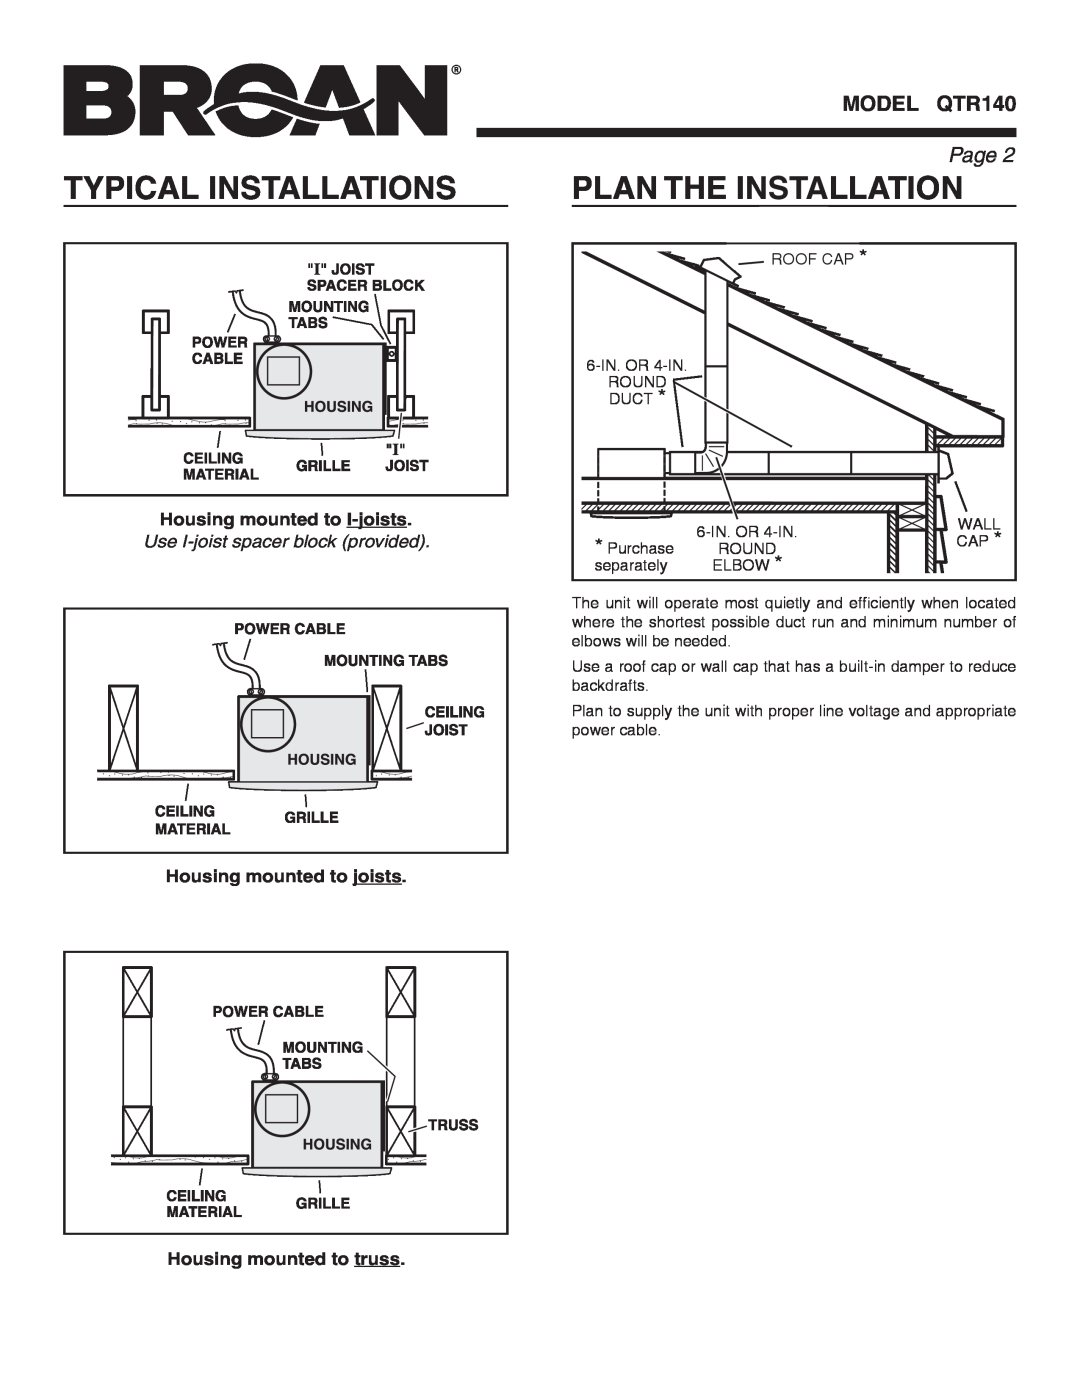 Broan QTR140 Typical Installations, Plan The Installation, Housing mounted to I-joists, Use I-joist spacer block provided 